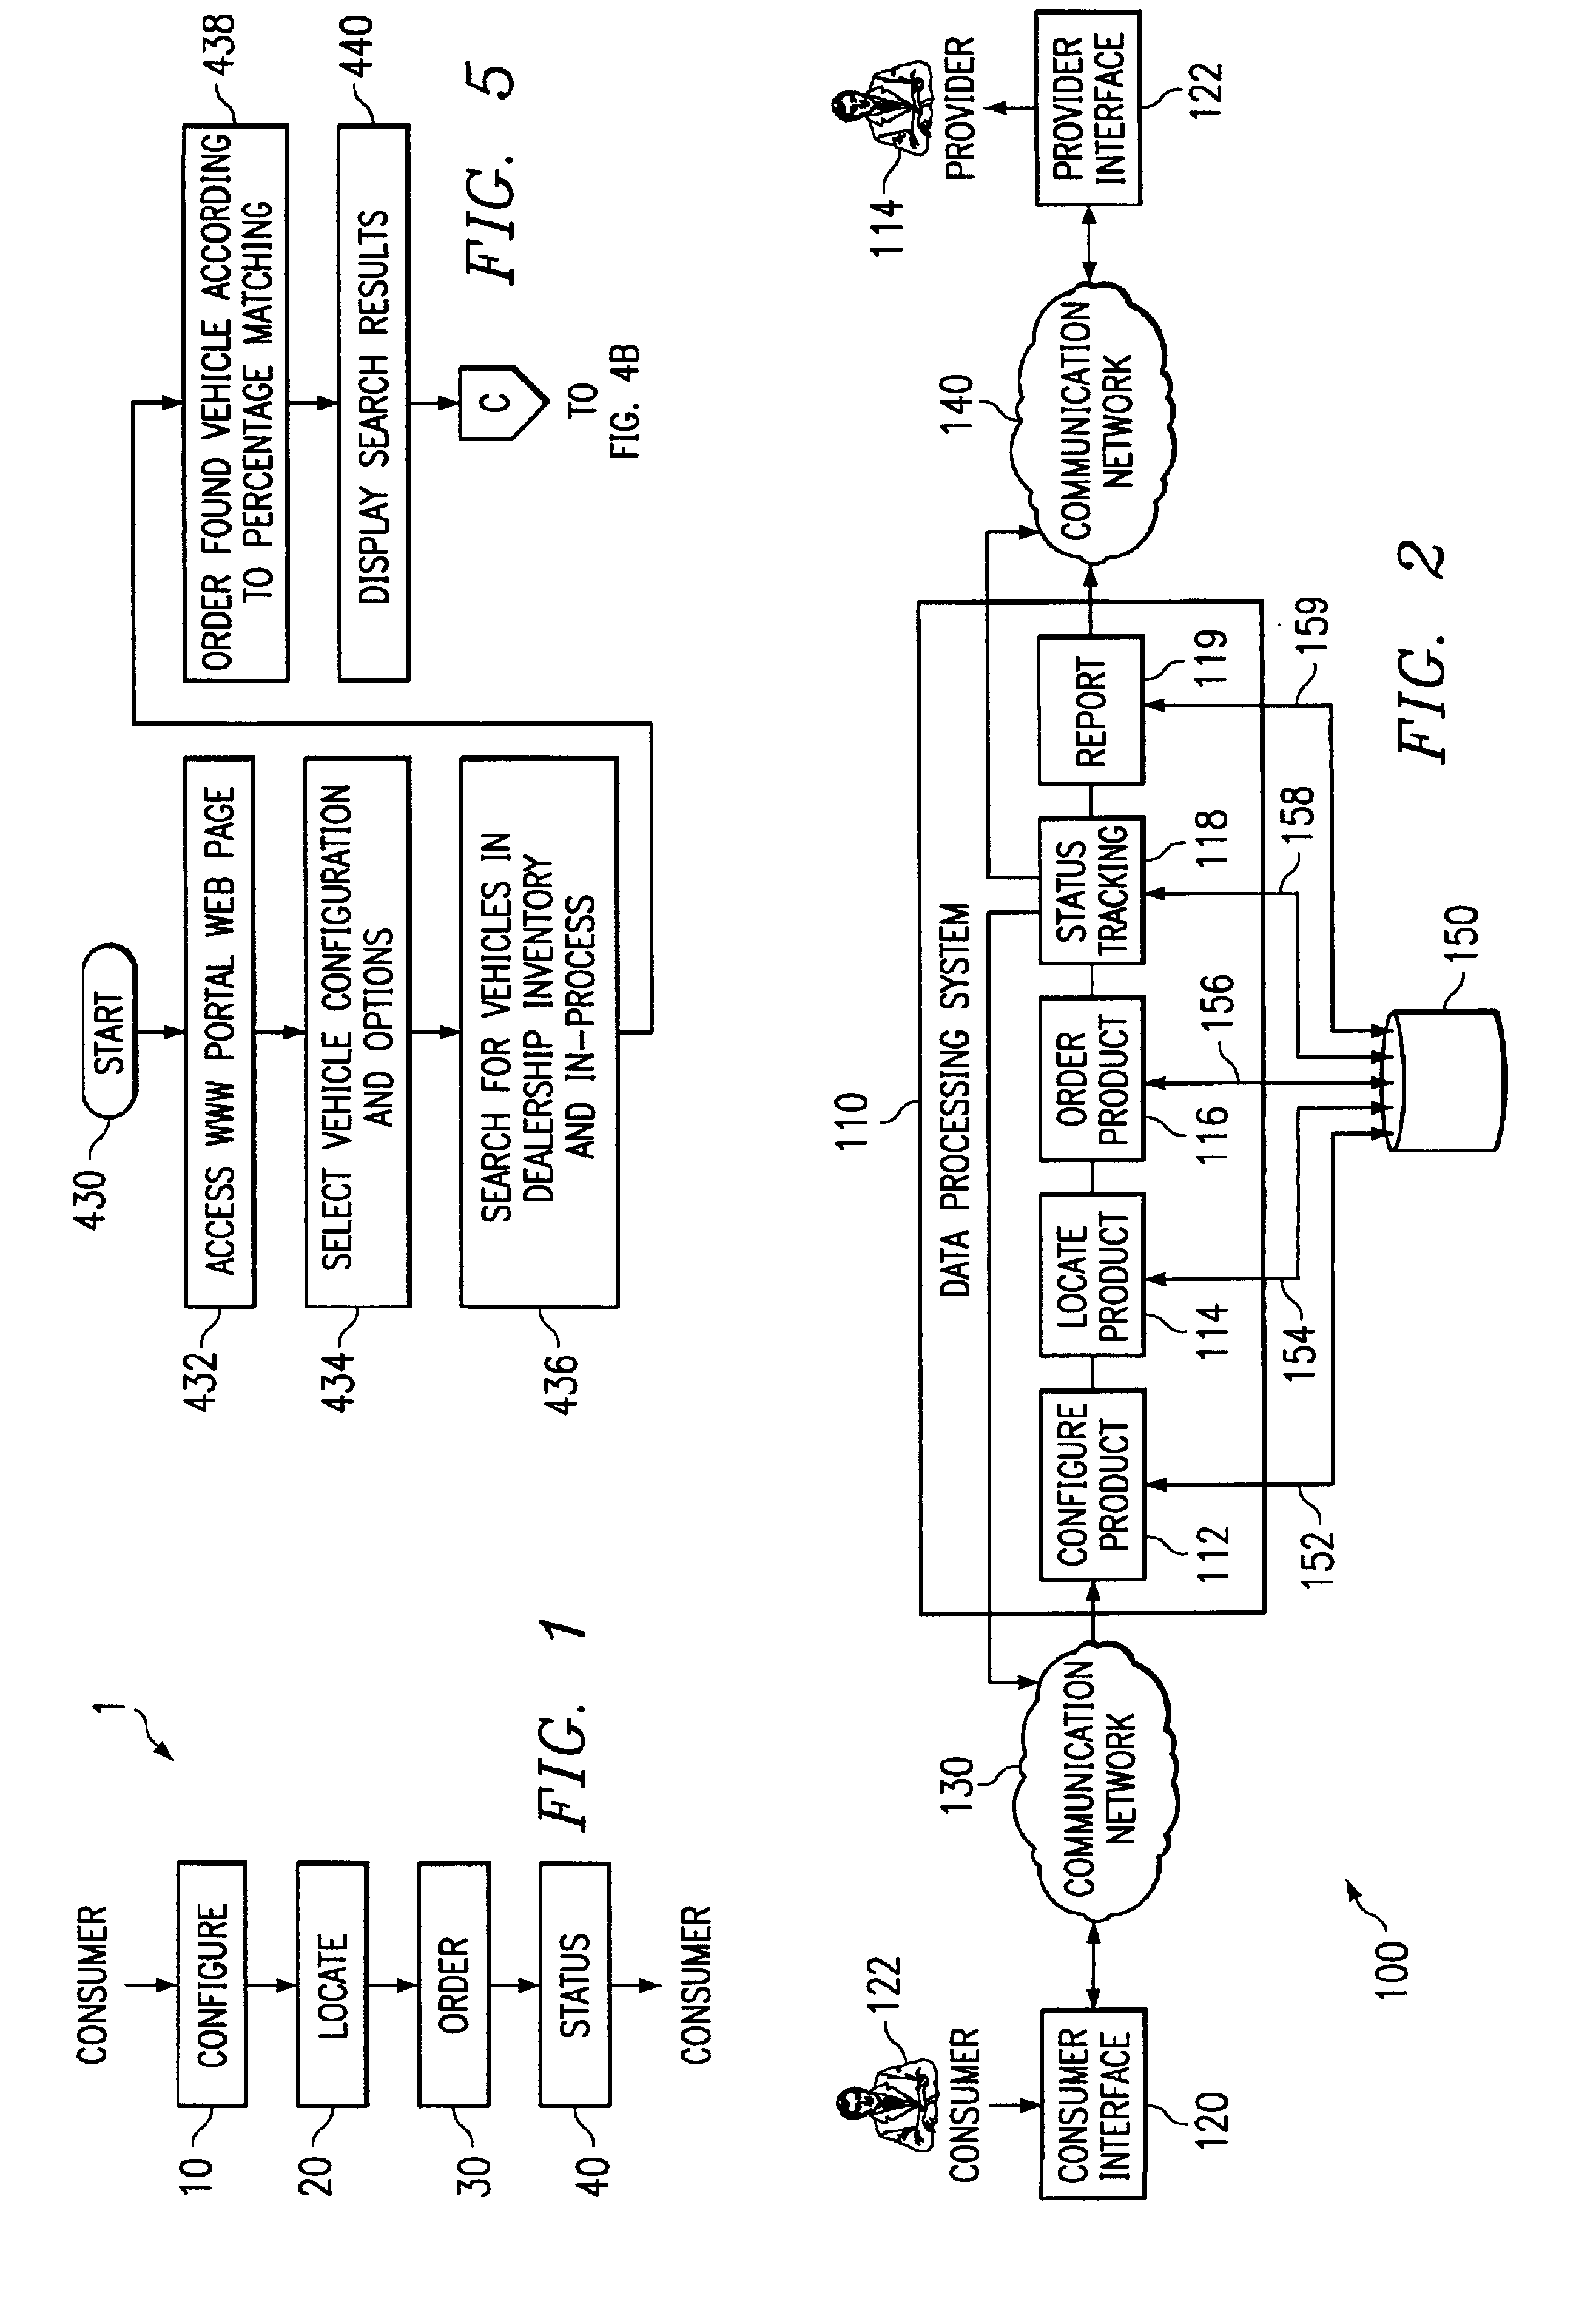 Online system and method of locating consumer product having specific configurations in the enterprise production pipeline and inventory